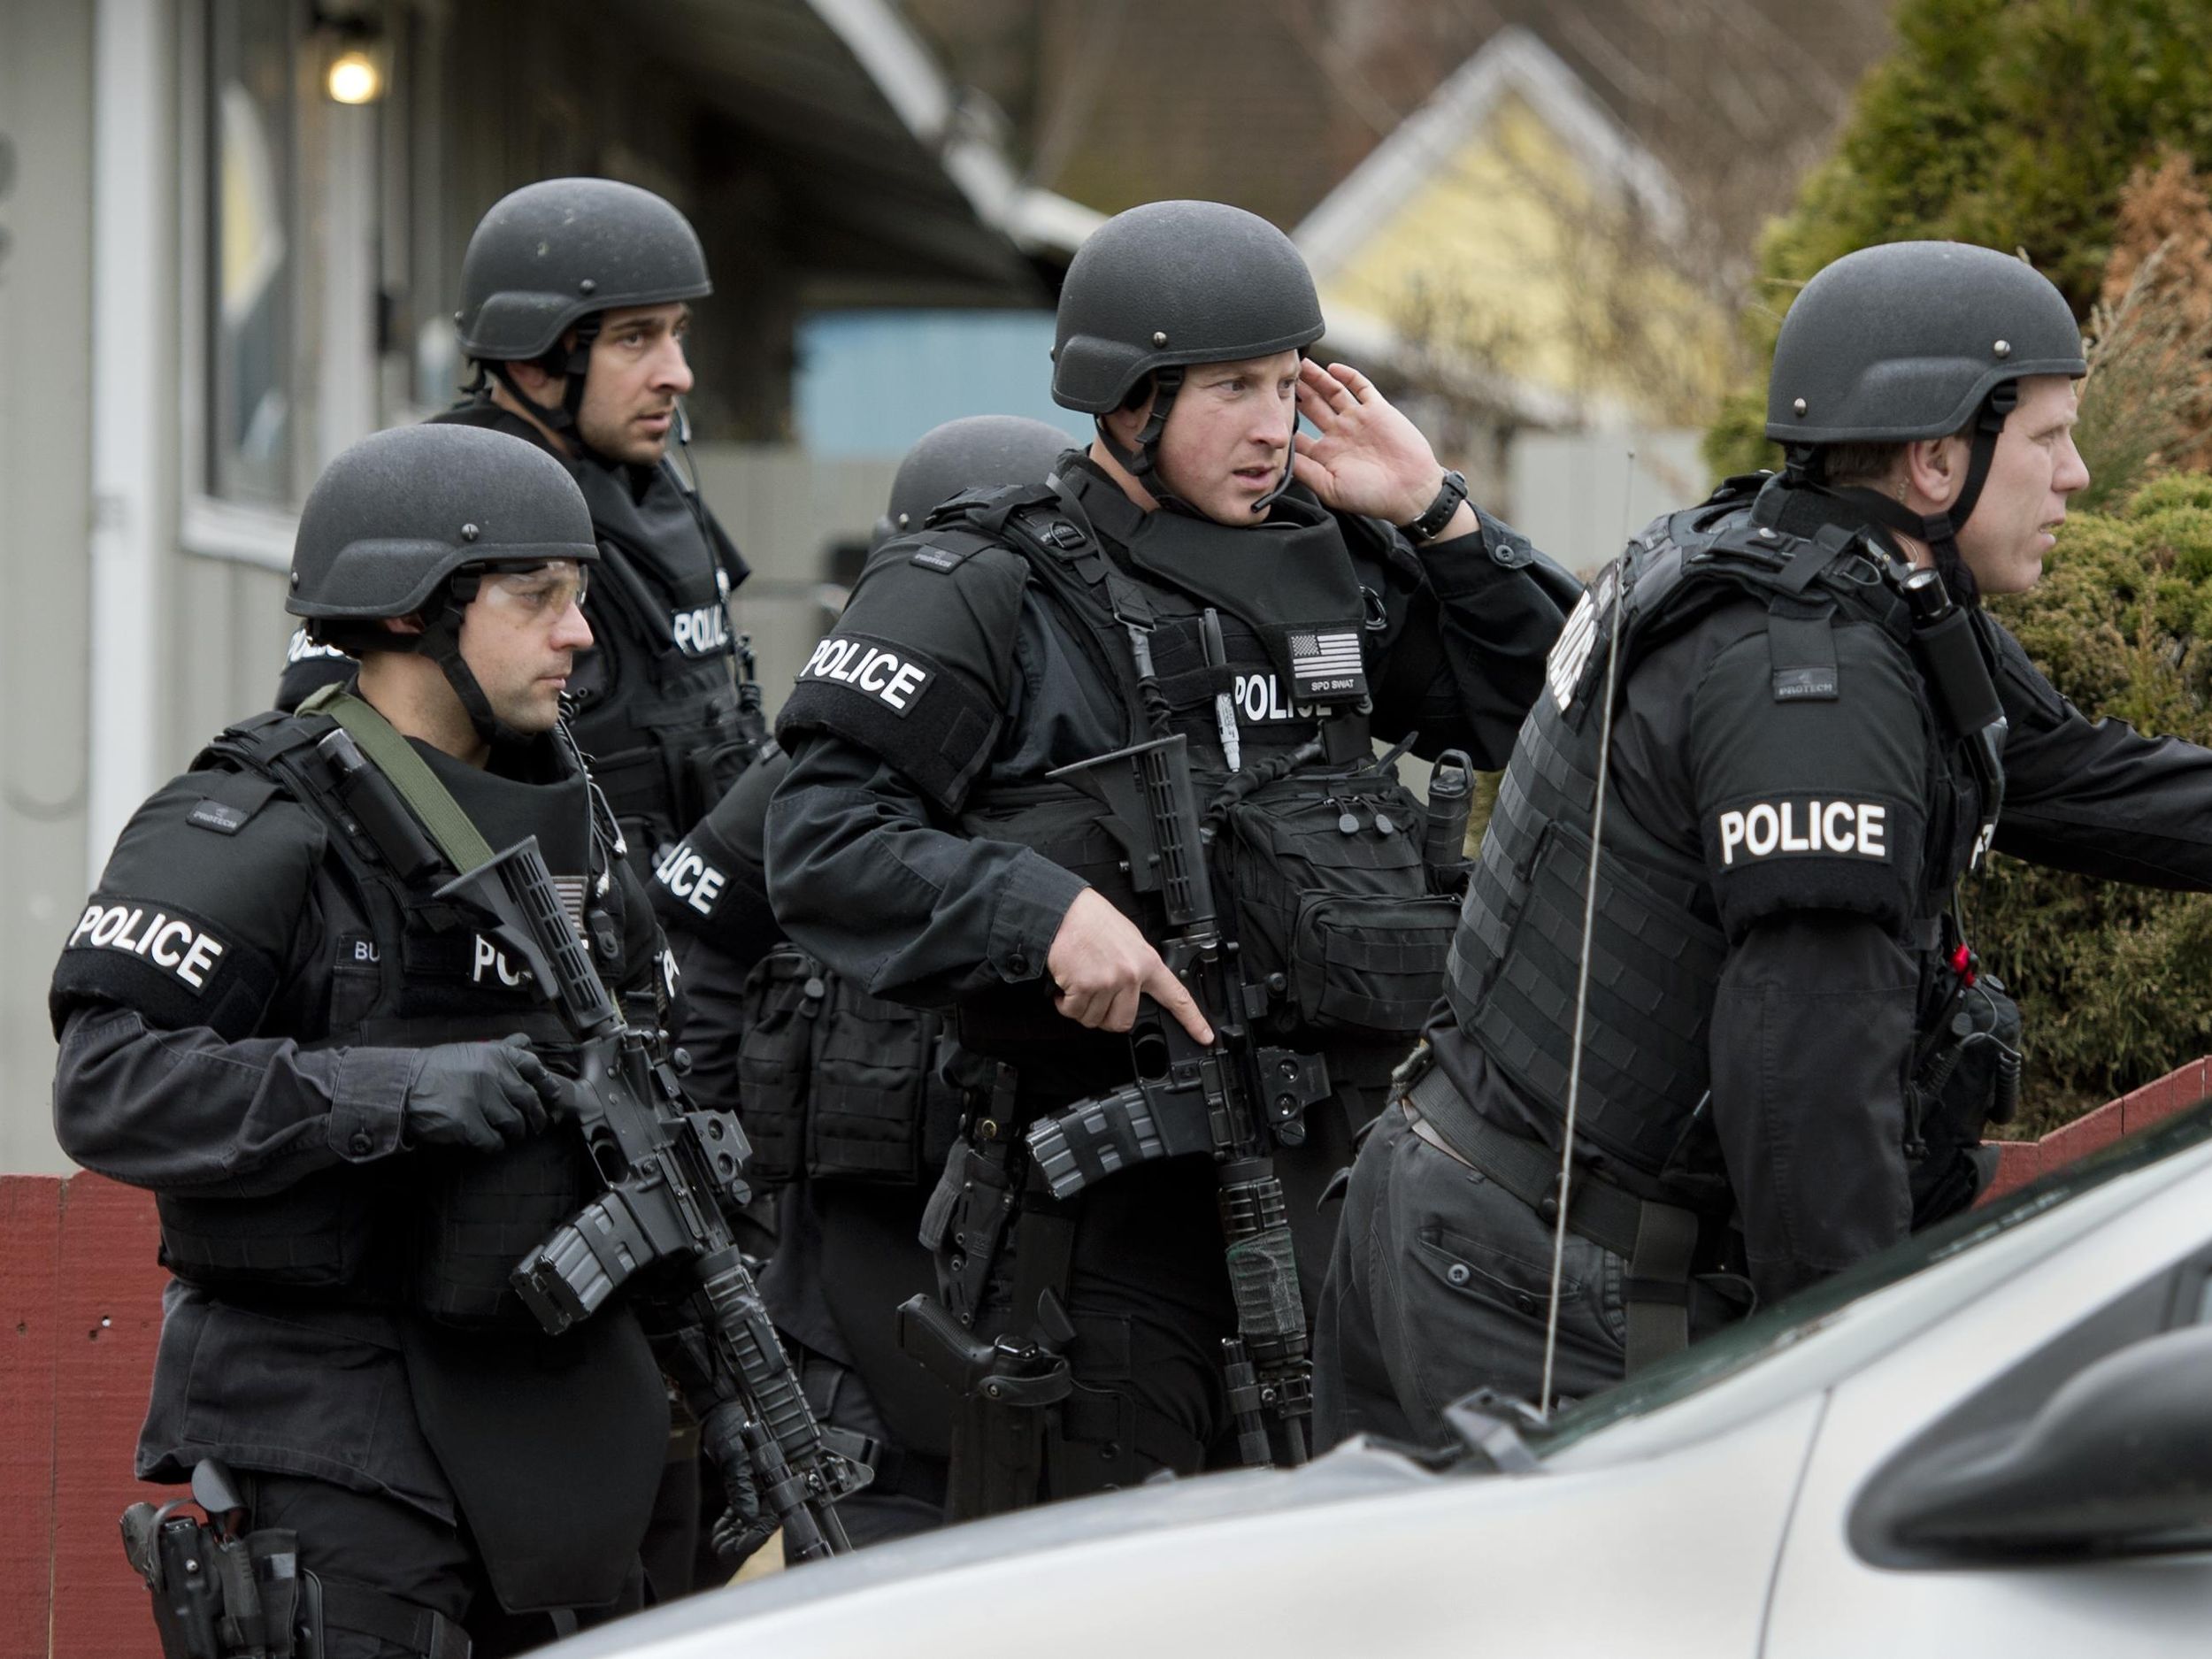 Police Ombudsman May Recommend Swat Members Start Wearing Body Cameras The Spokesman Review